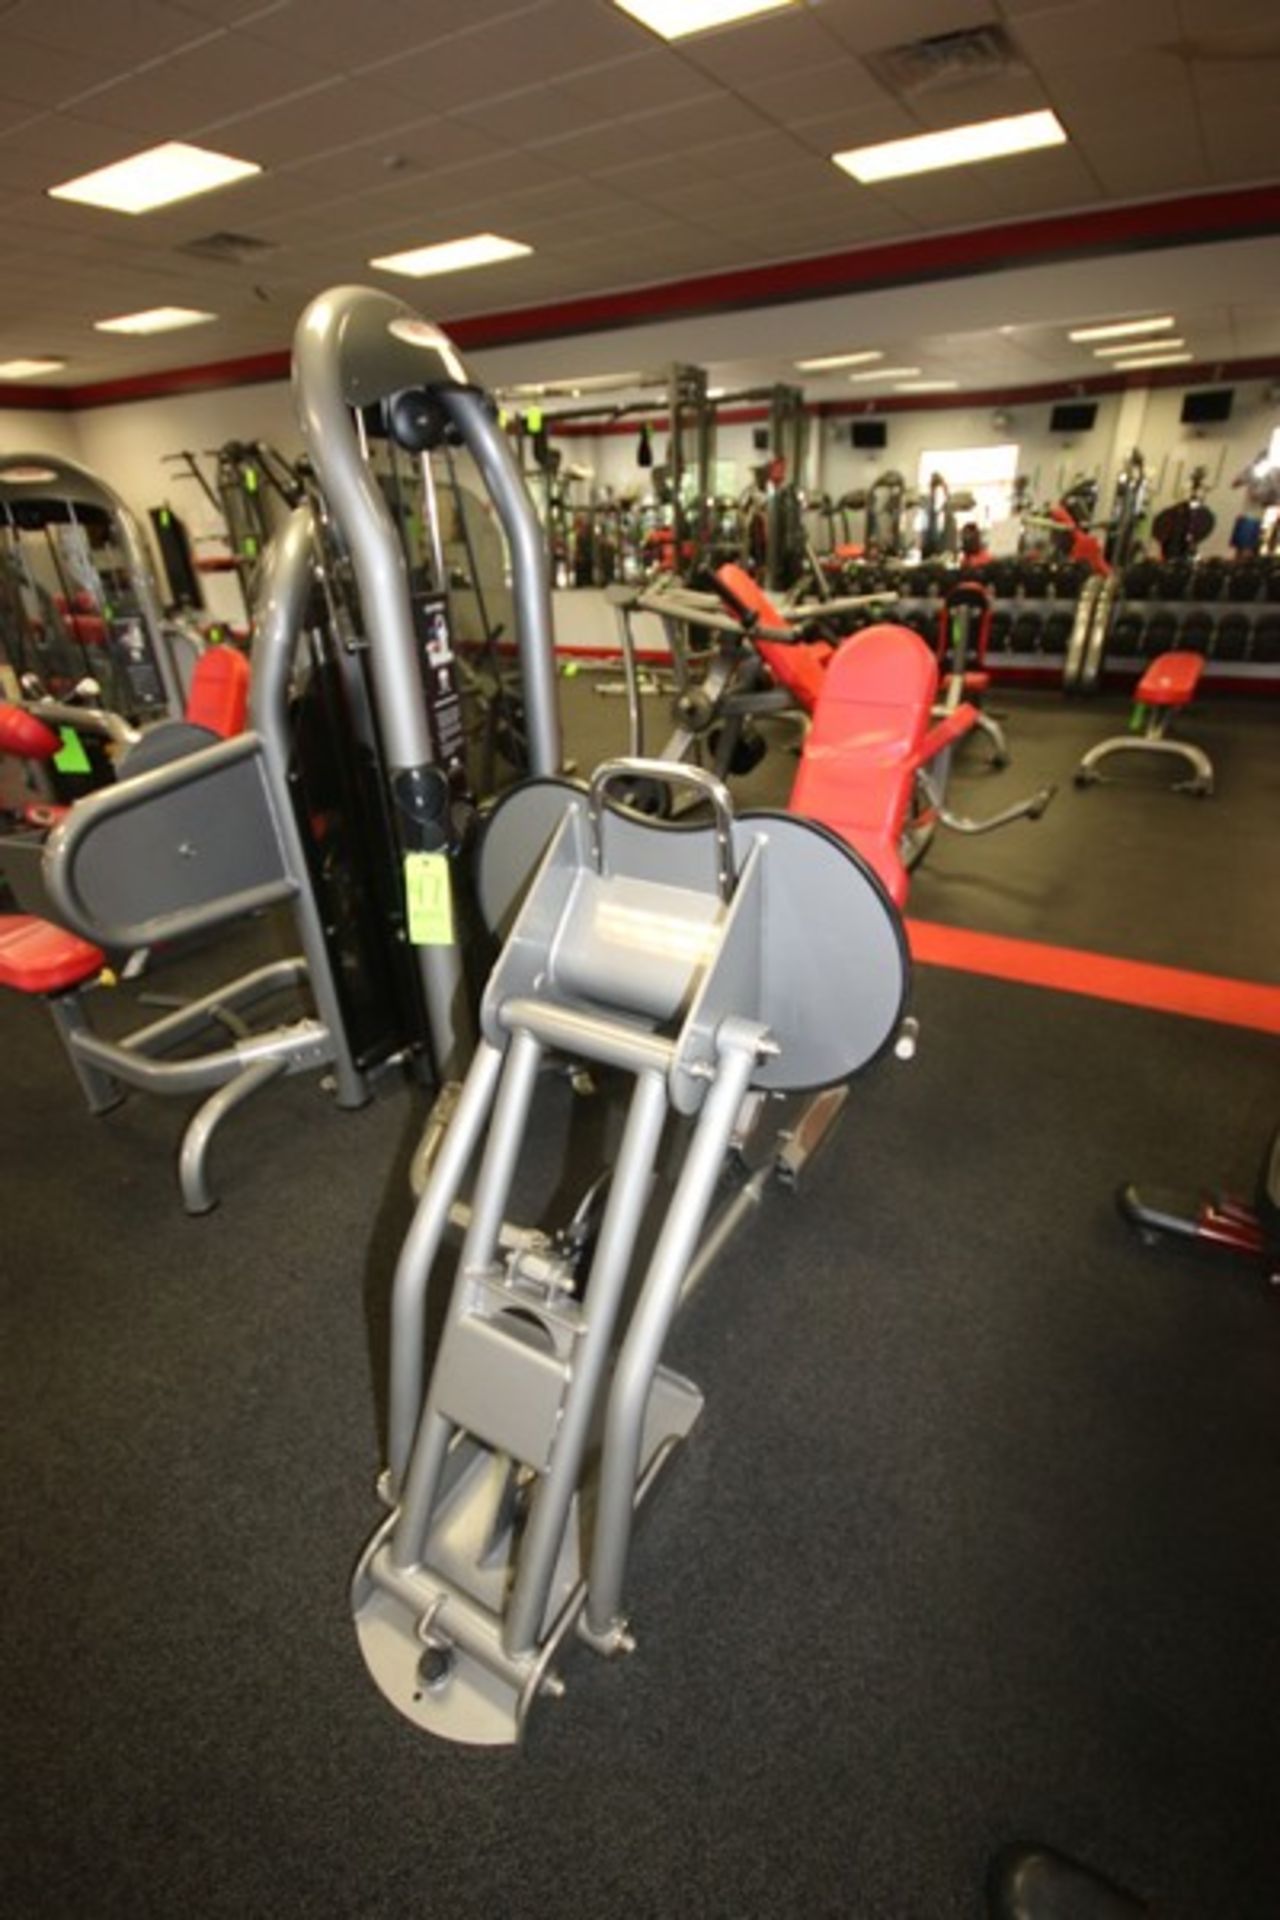 Matrix Leg Press Cable Machine, 10-385 lbs. Weight Range on Plates, Overall Dims.: Aprox. 5-1/2' L x